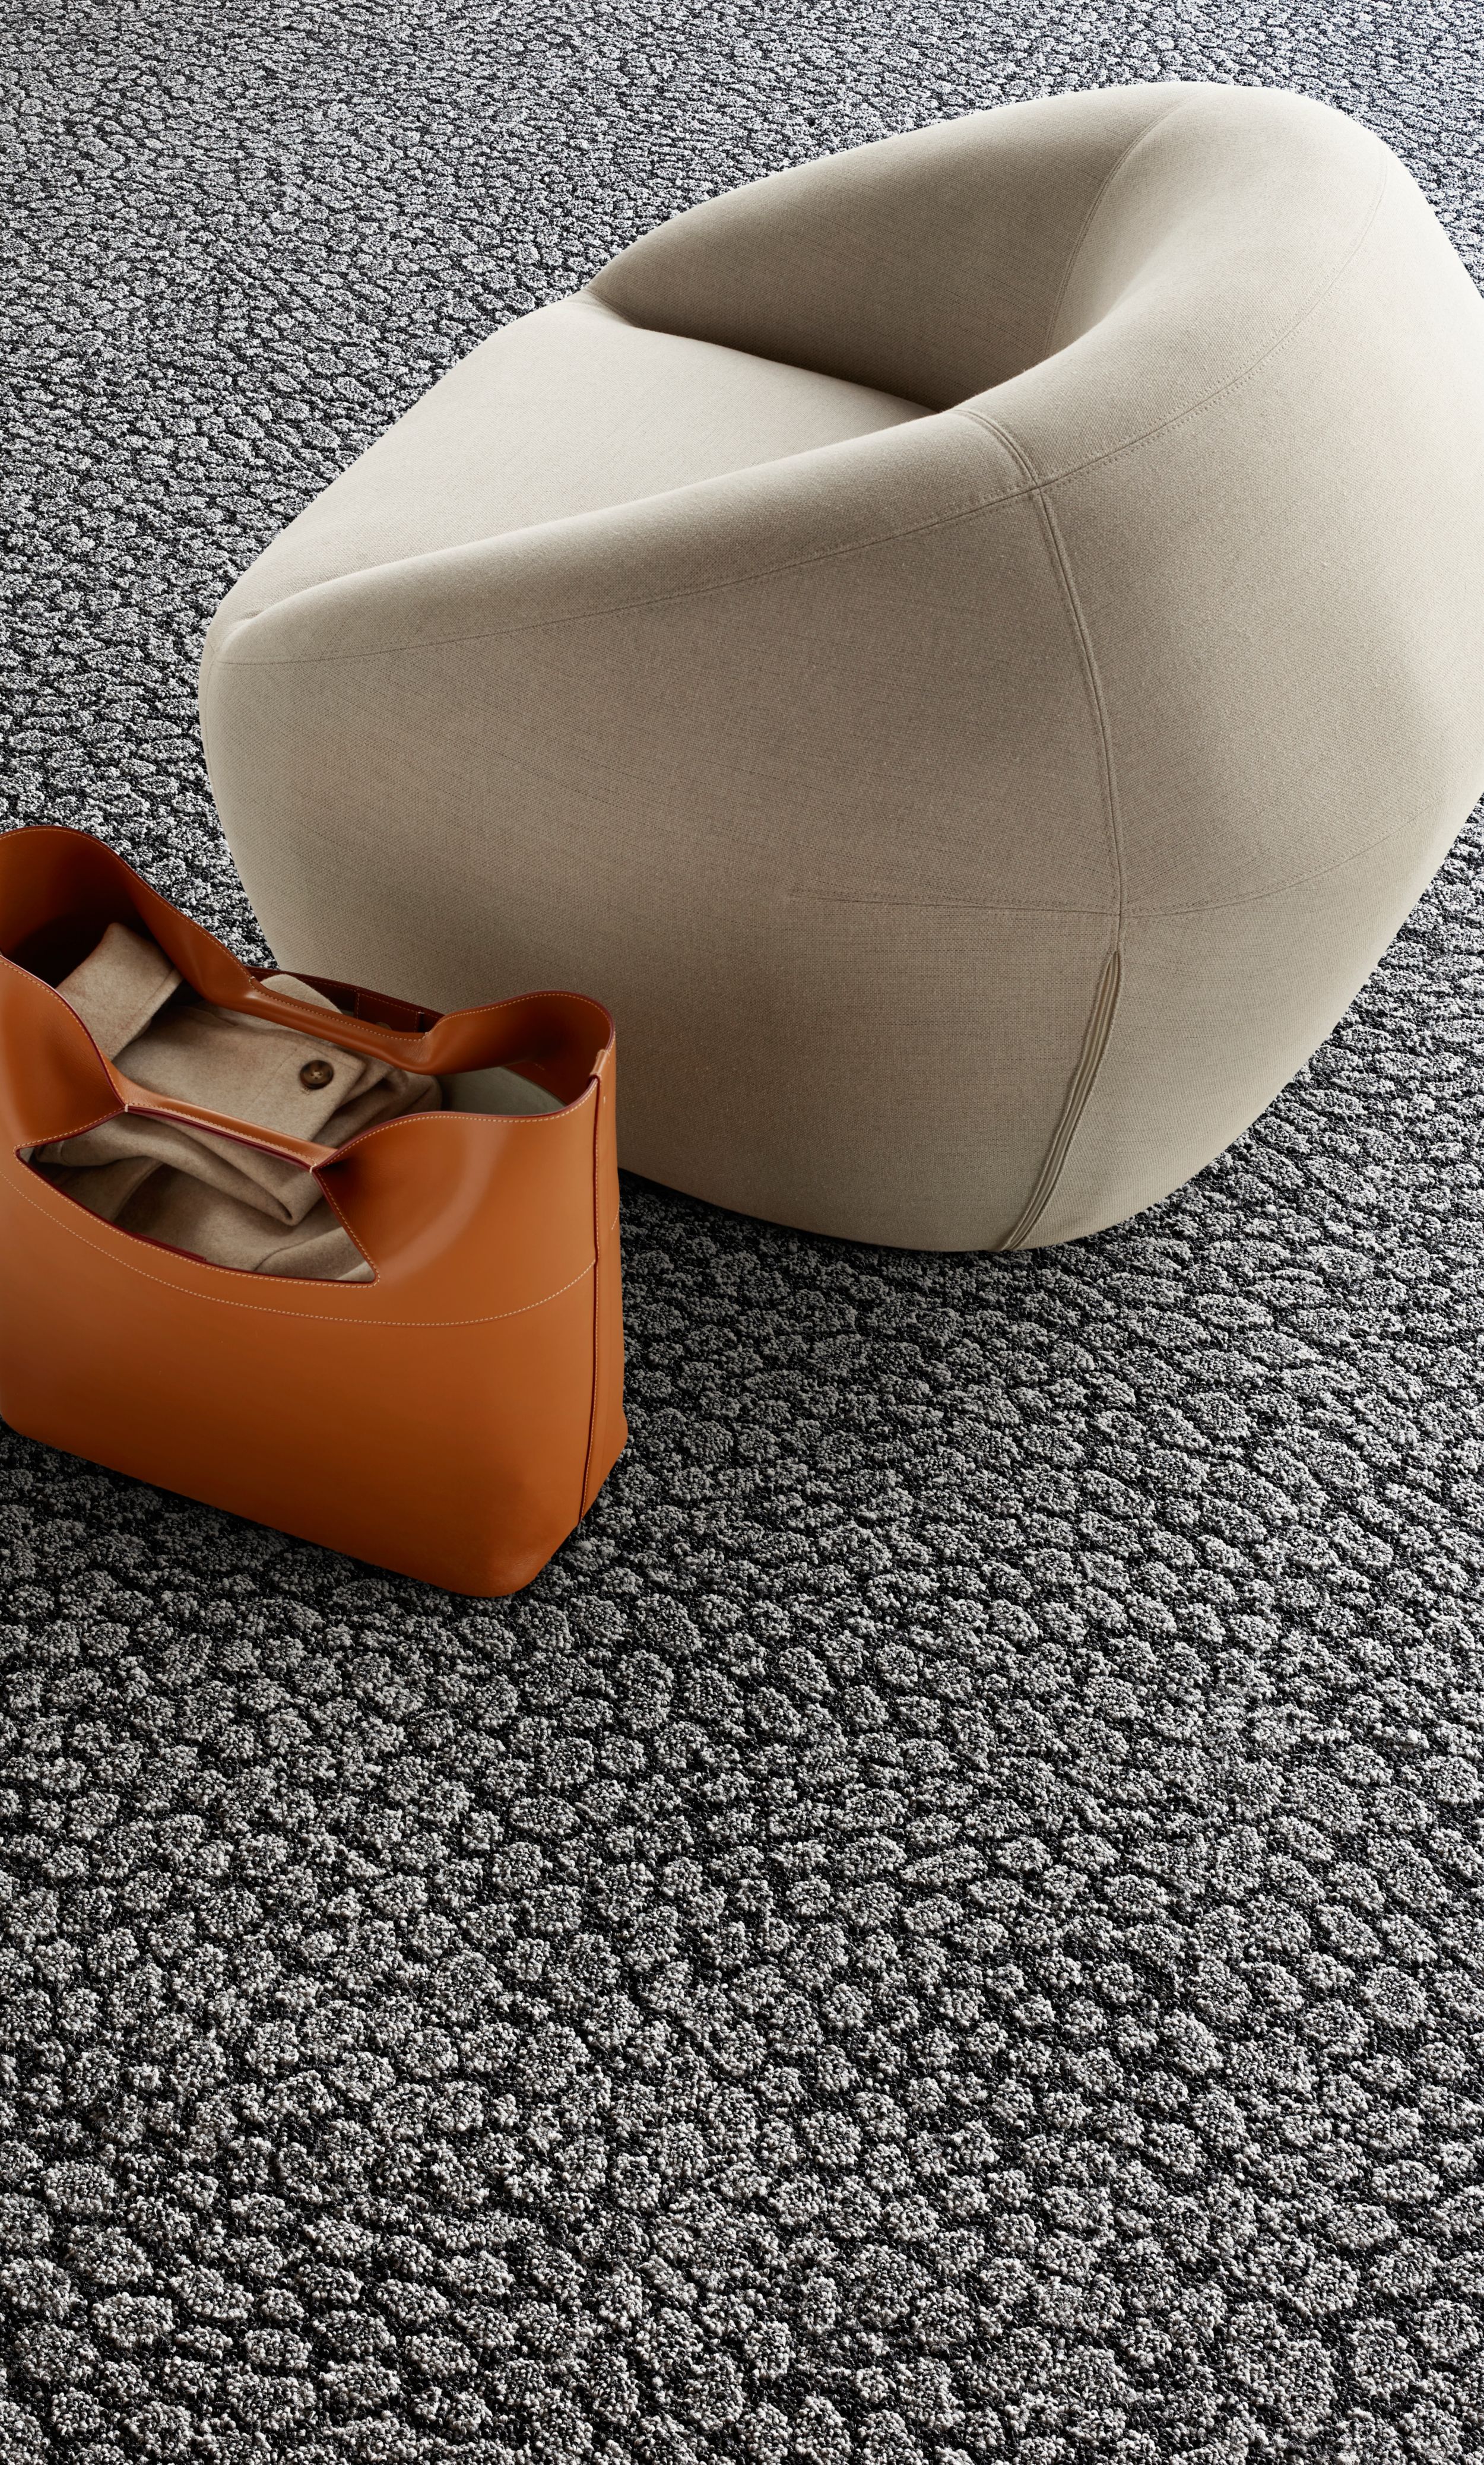 Interface E611 carpet tile detail with low chair and orange tote Bildnummer 2